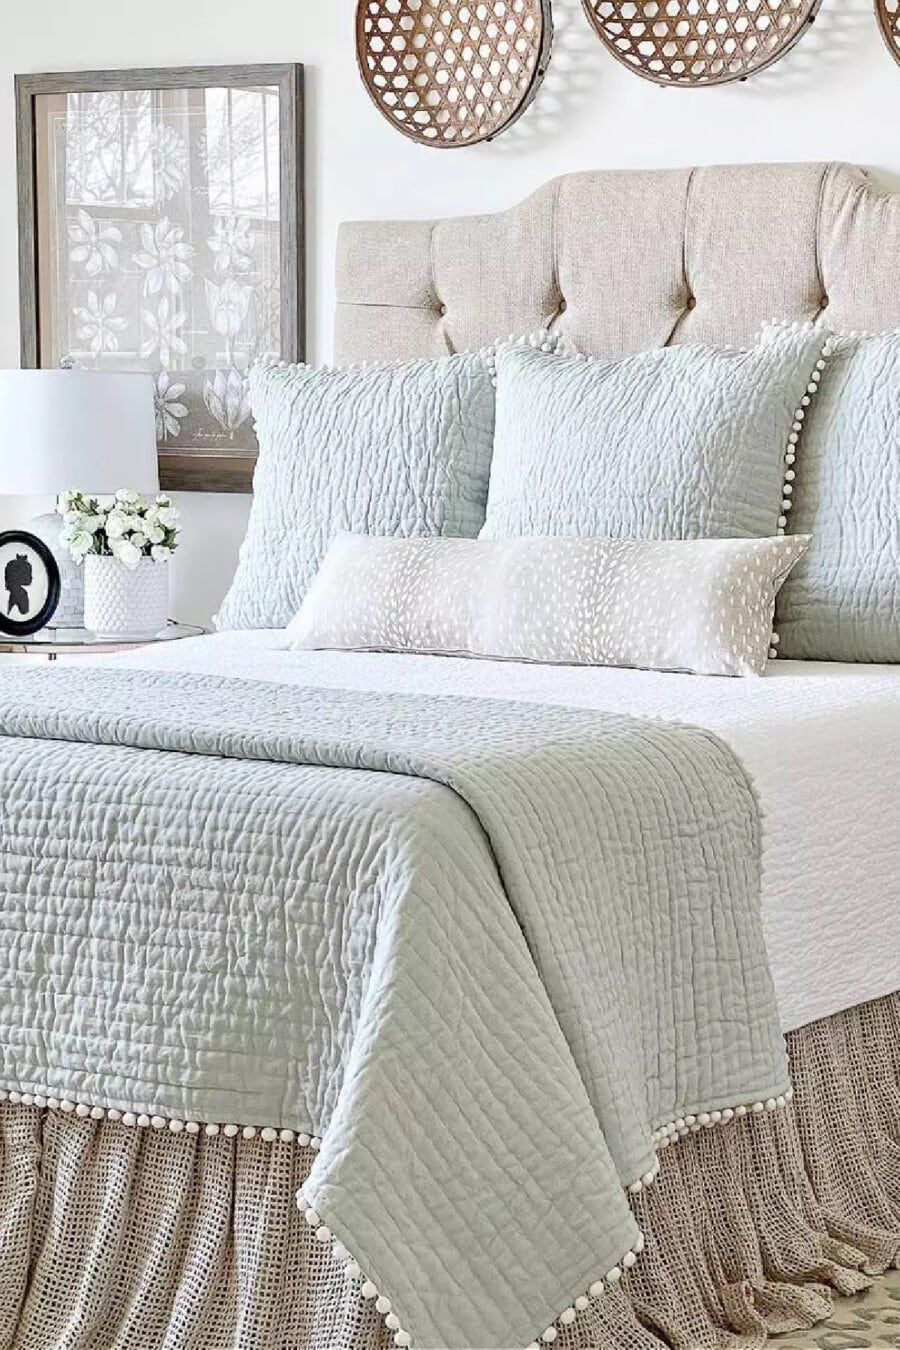 CHOOSING THE PERFECT UPHOLSTERED HEADBOARD